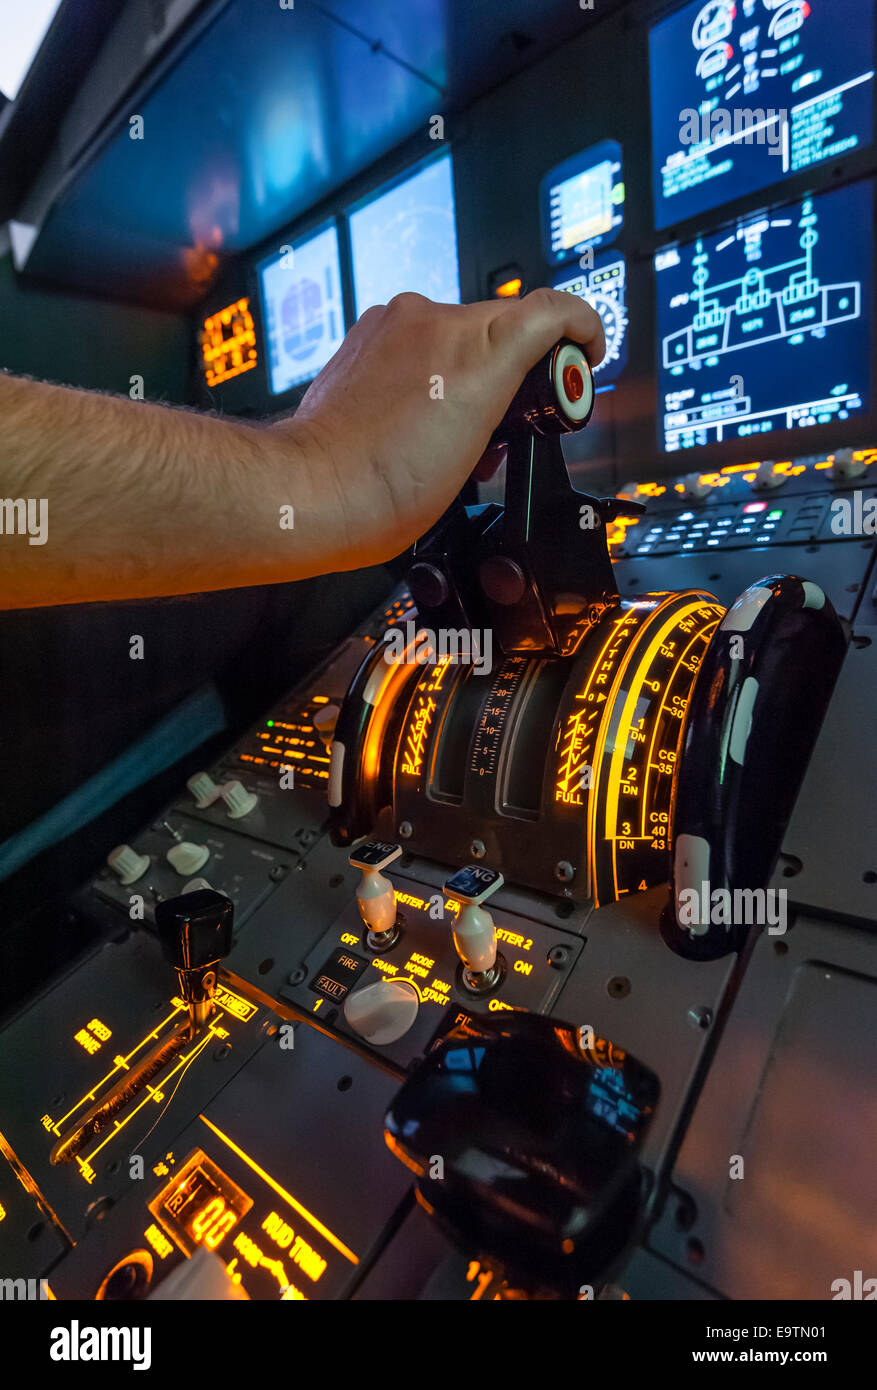 Cockpit of an Airbus A320 flight simulator that is used for training of professional airline pilots (hand on throttle lever). Stock Photo